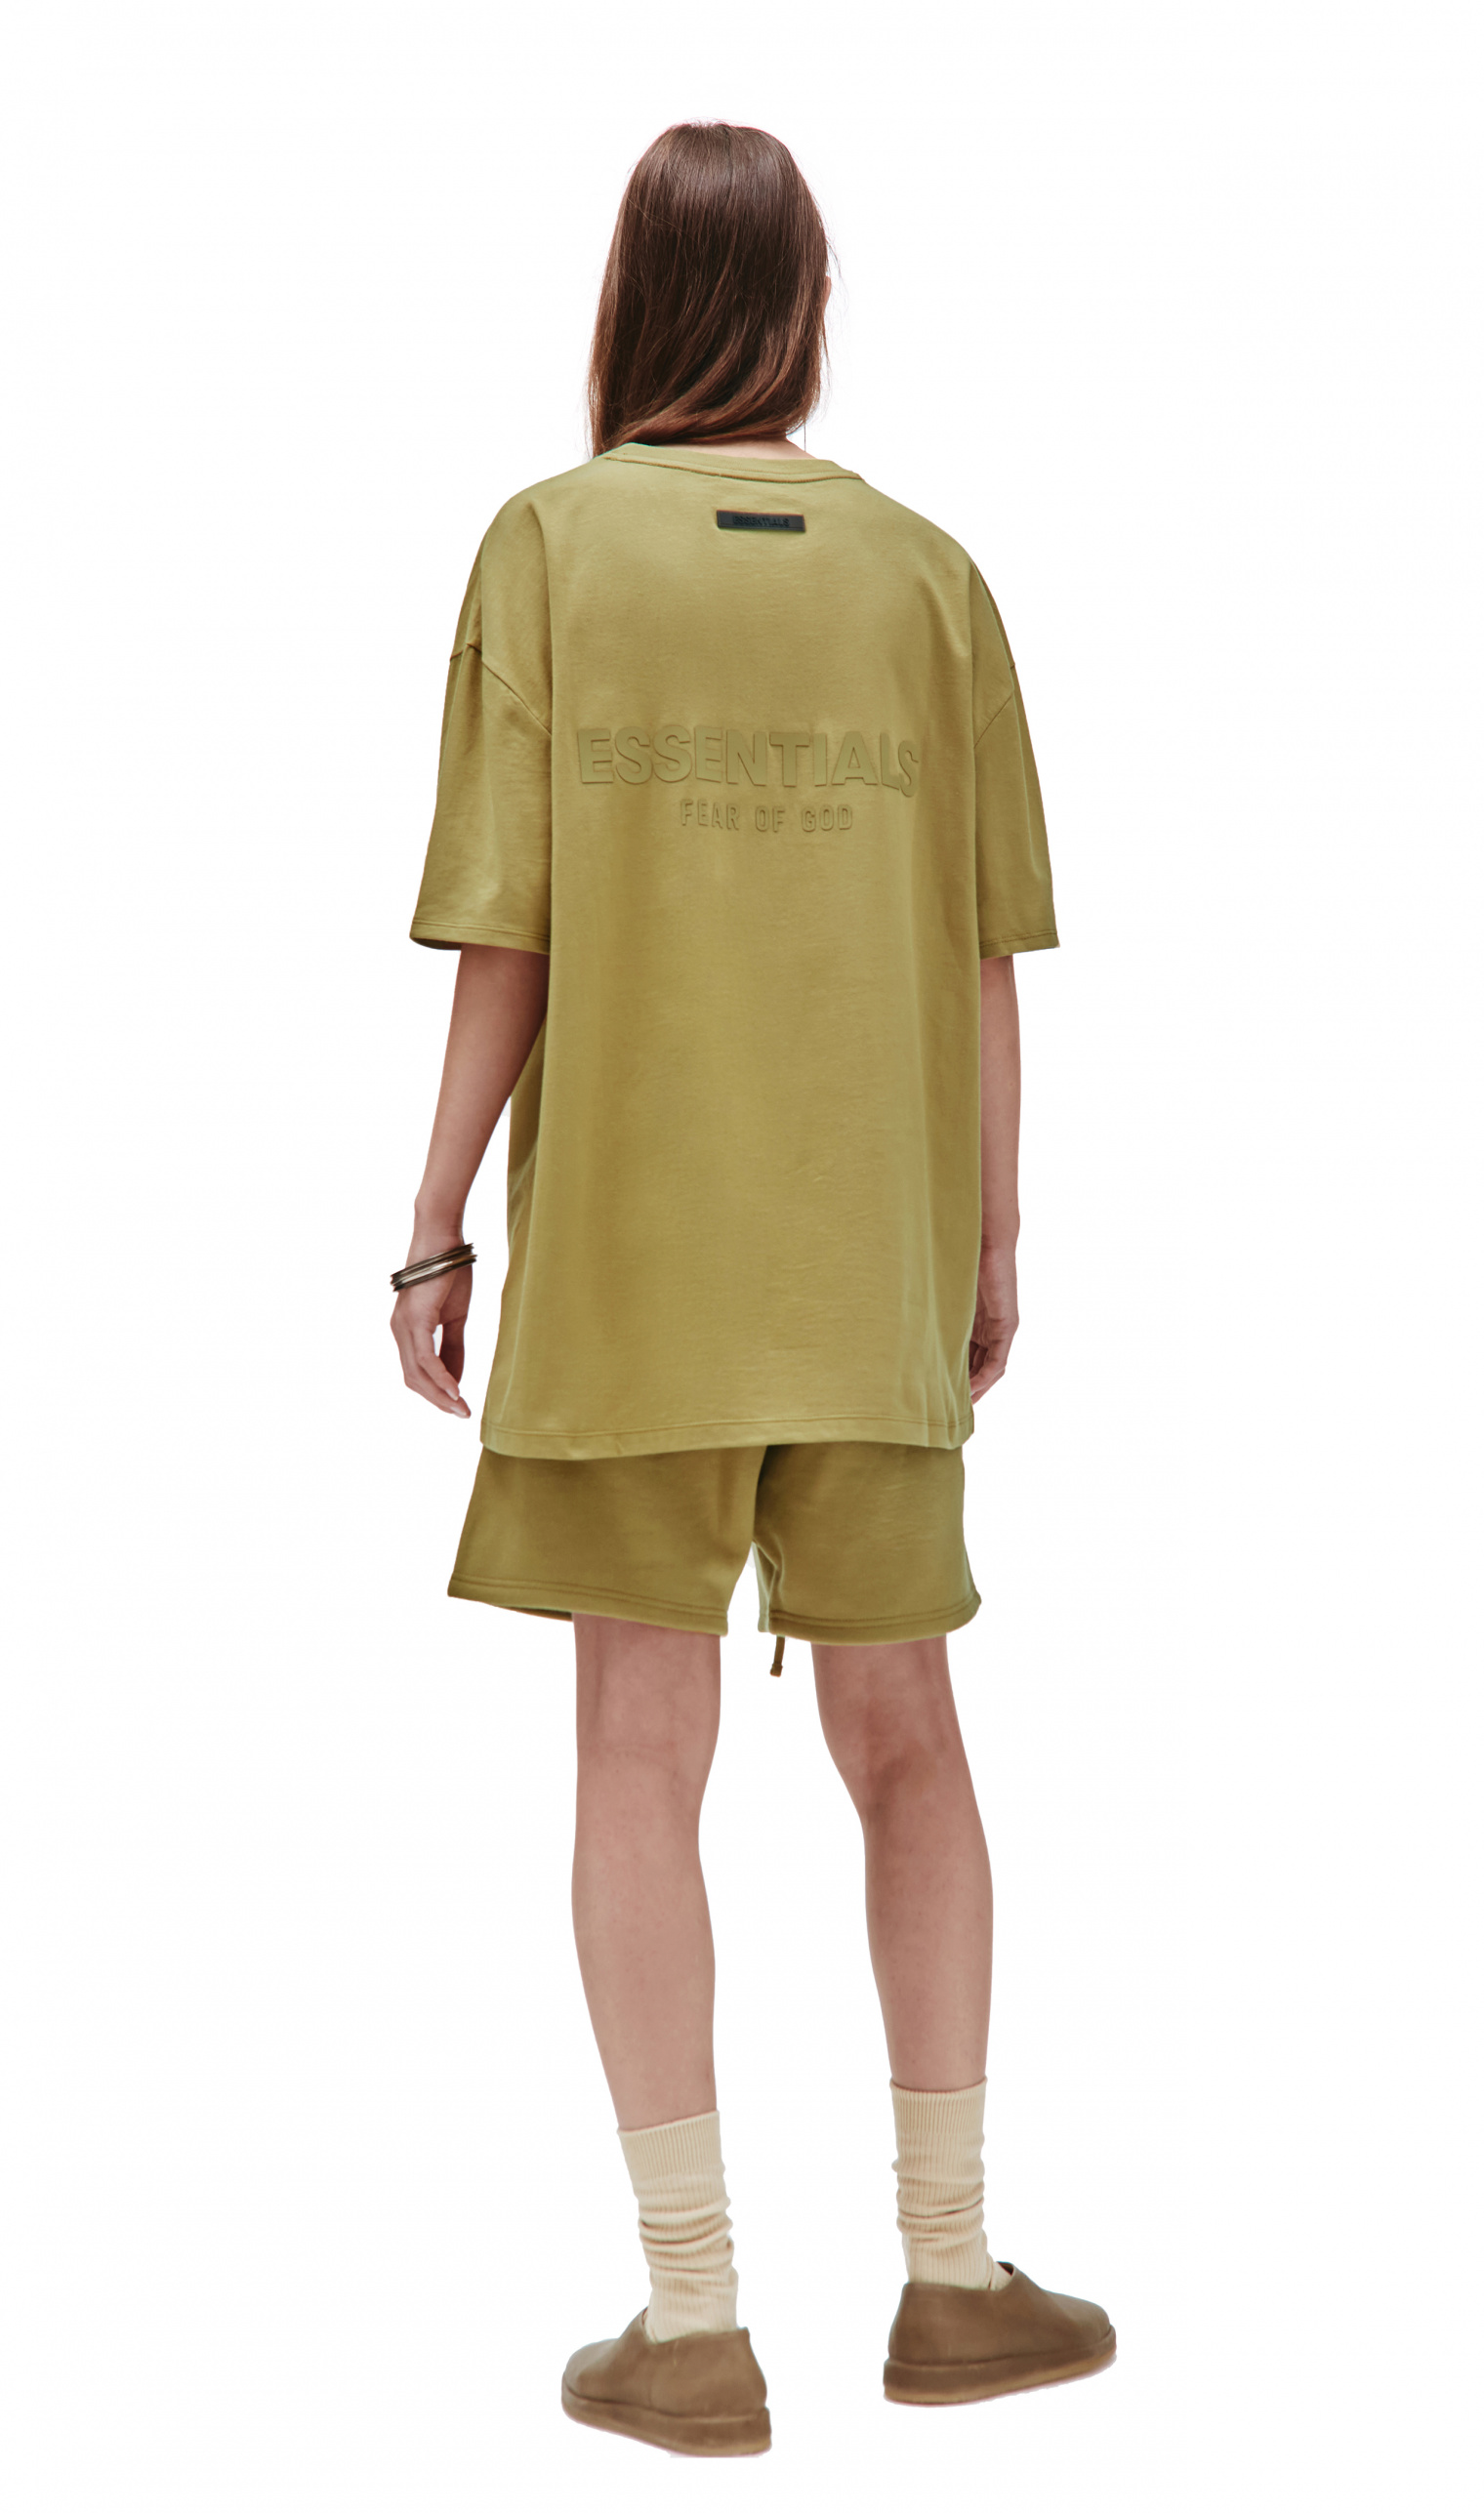 Fear of God Essentials T-shirt With Back Logo